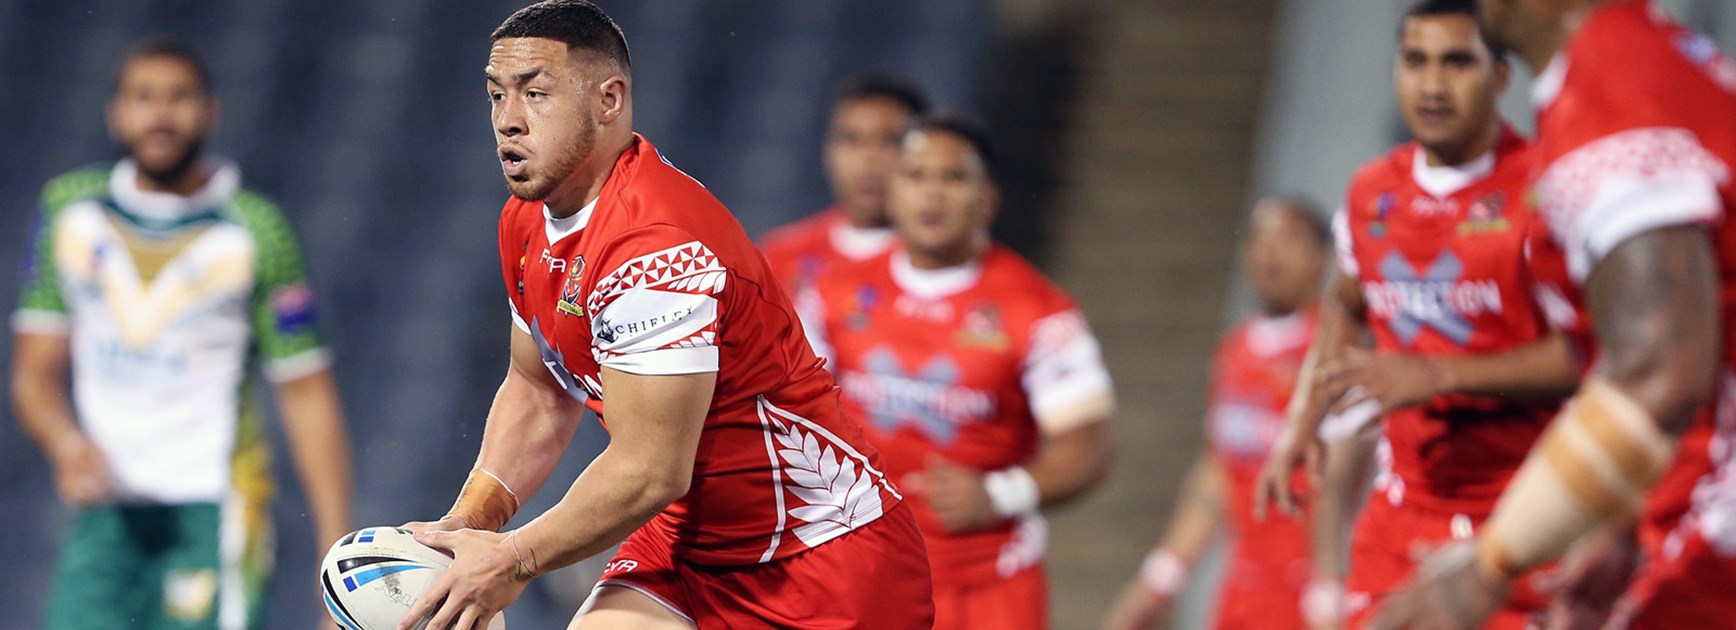 Daniel Foster guided Tonga around the park in their 28-8 win over Cook Islands.